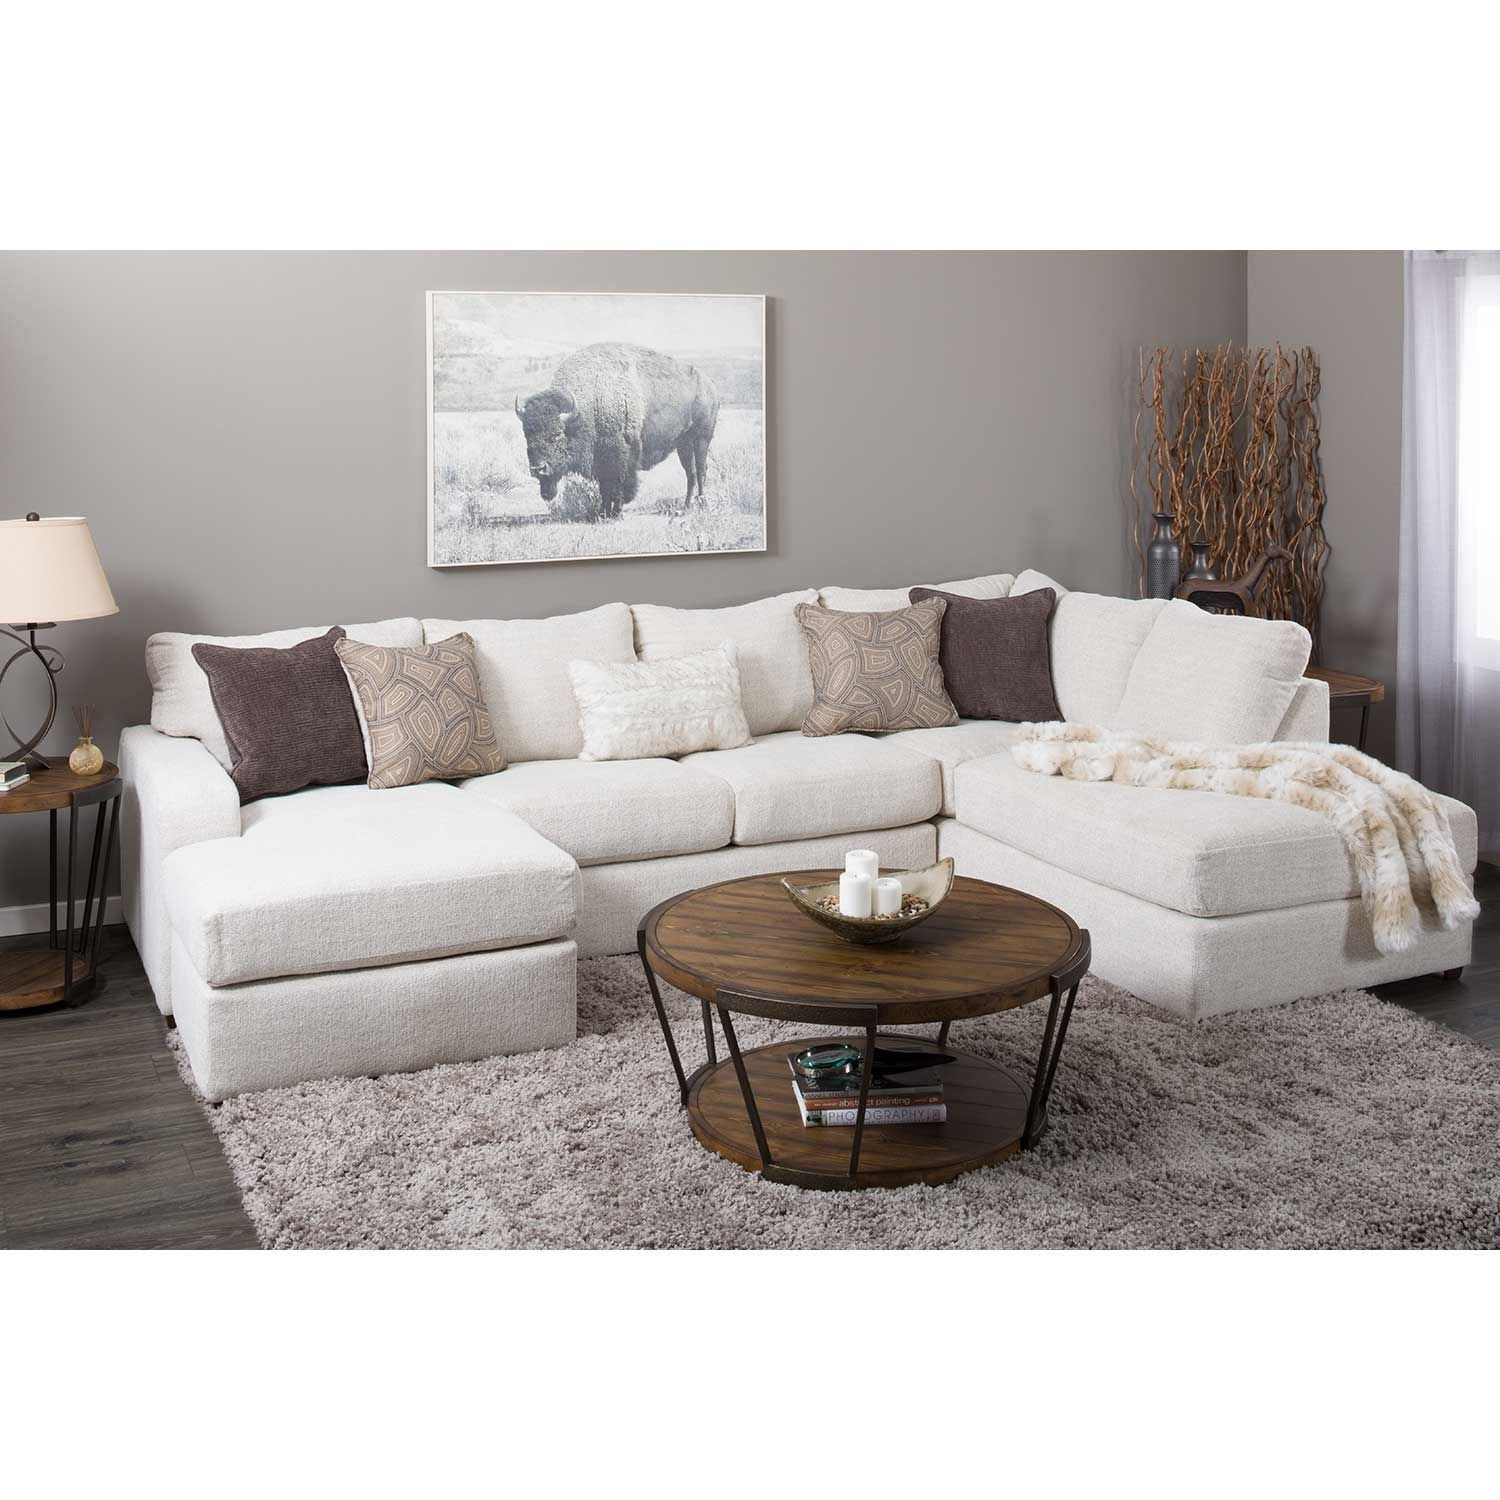 Amplify Beige 2 Piece LAF Sofa Chaise Sectional | 8011 LAF ...